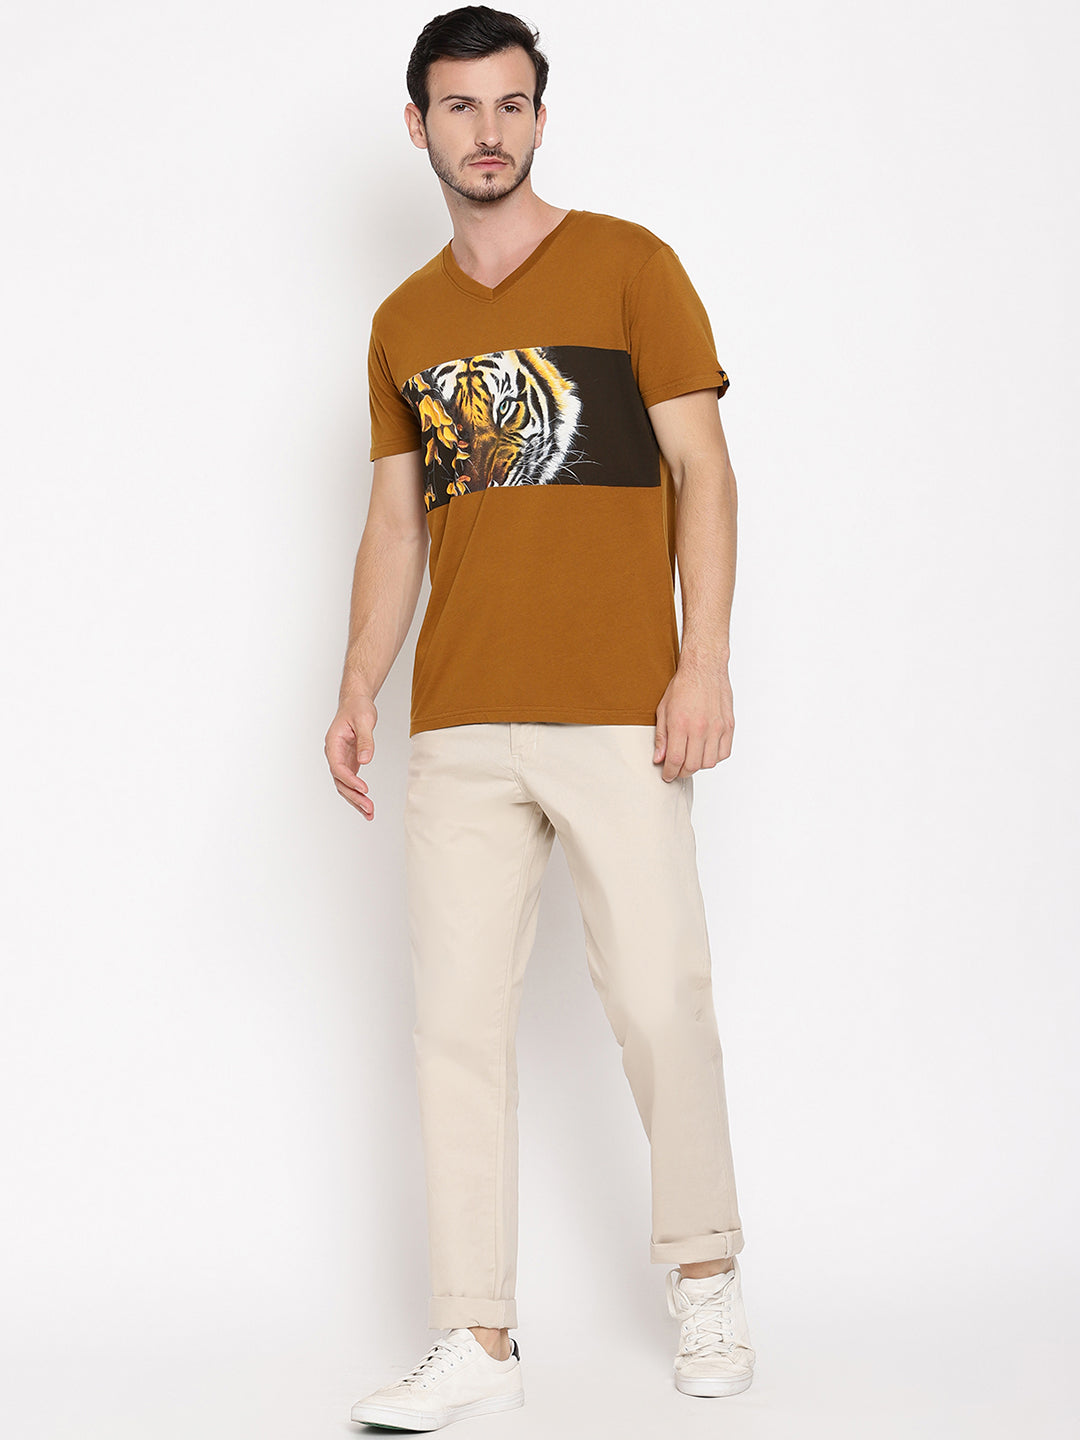 Tiger Eyes with Leaves Golden Brown Printed Men T-Shirt Wolfpack